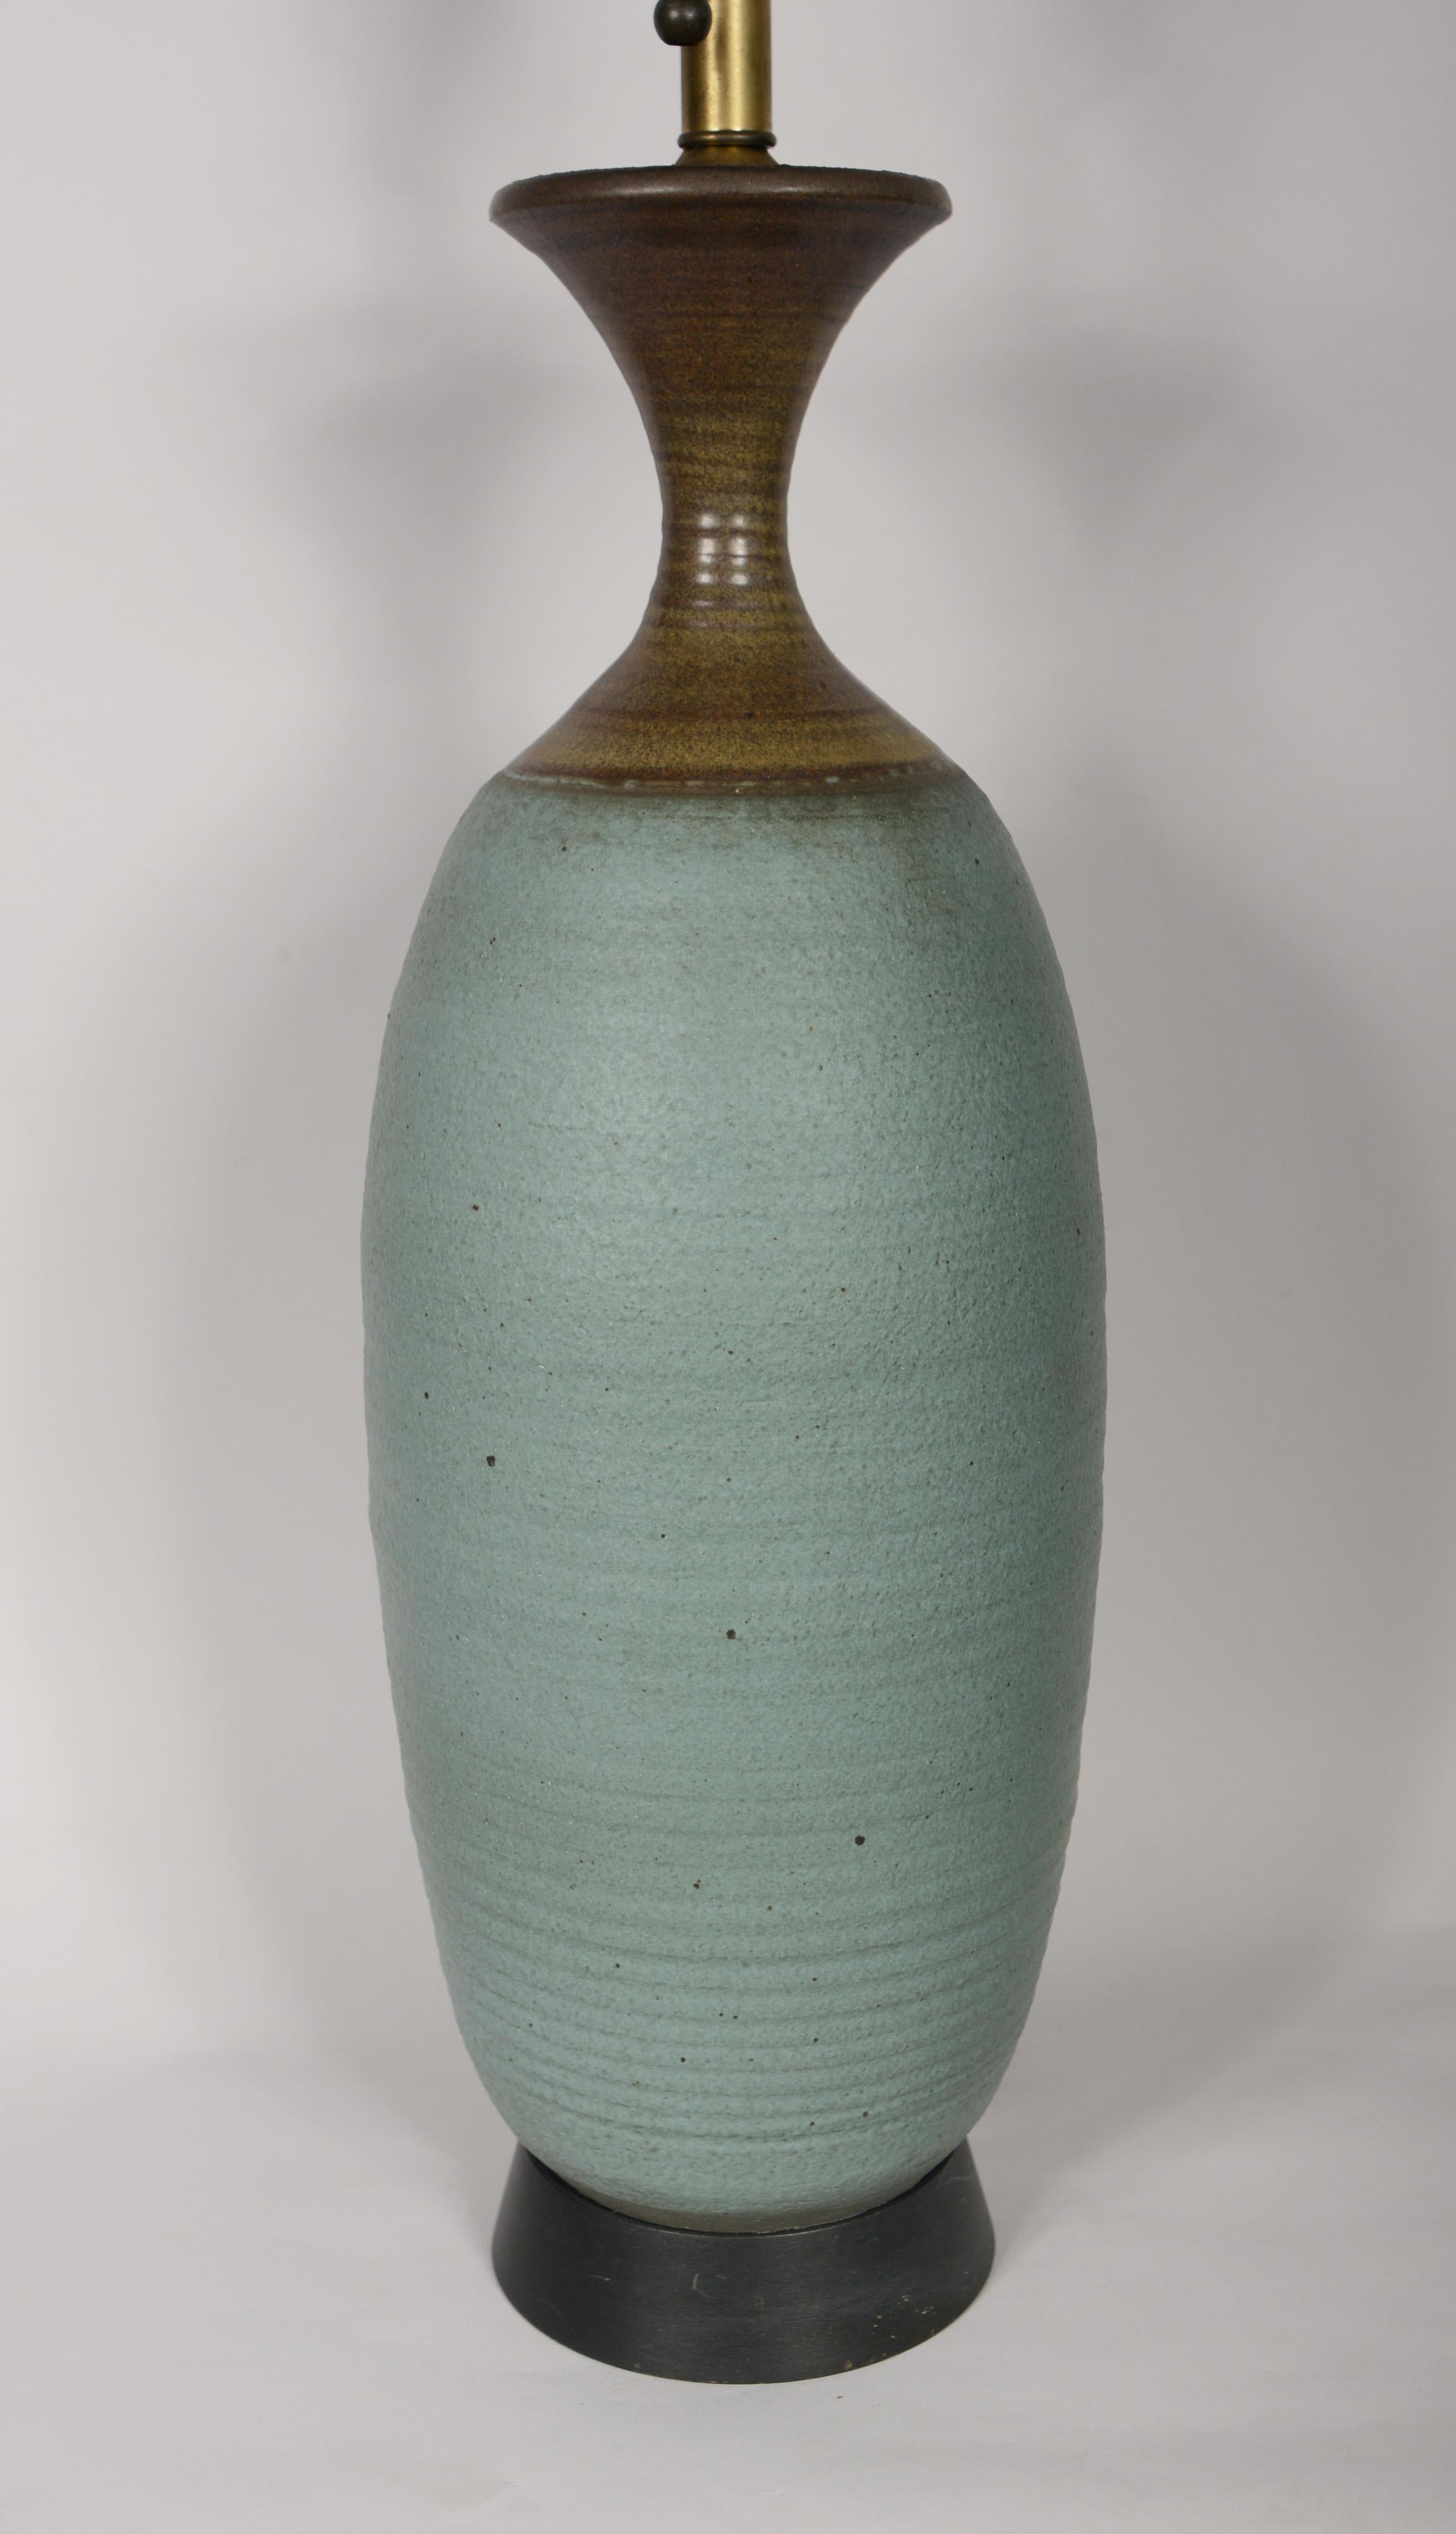 Hand thrown ceramic lamp by Bob Kinzie for Affiliated Craftsmen. This lamp has an outstanding form with great color combination. The lamp is the tallest version of this style measuring 28 inches to the base of the socket.